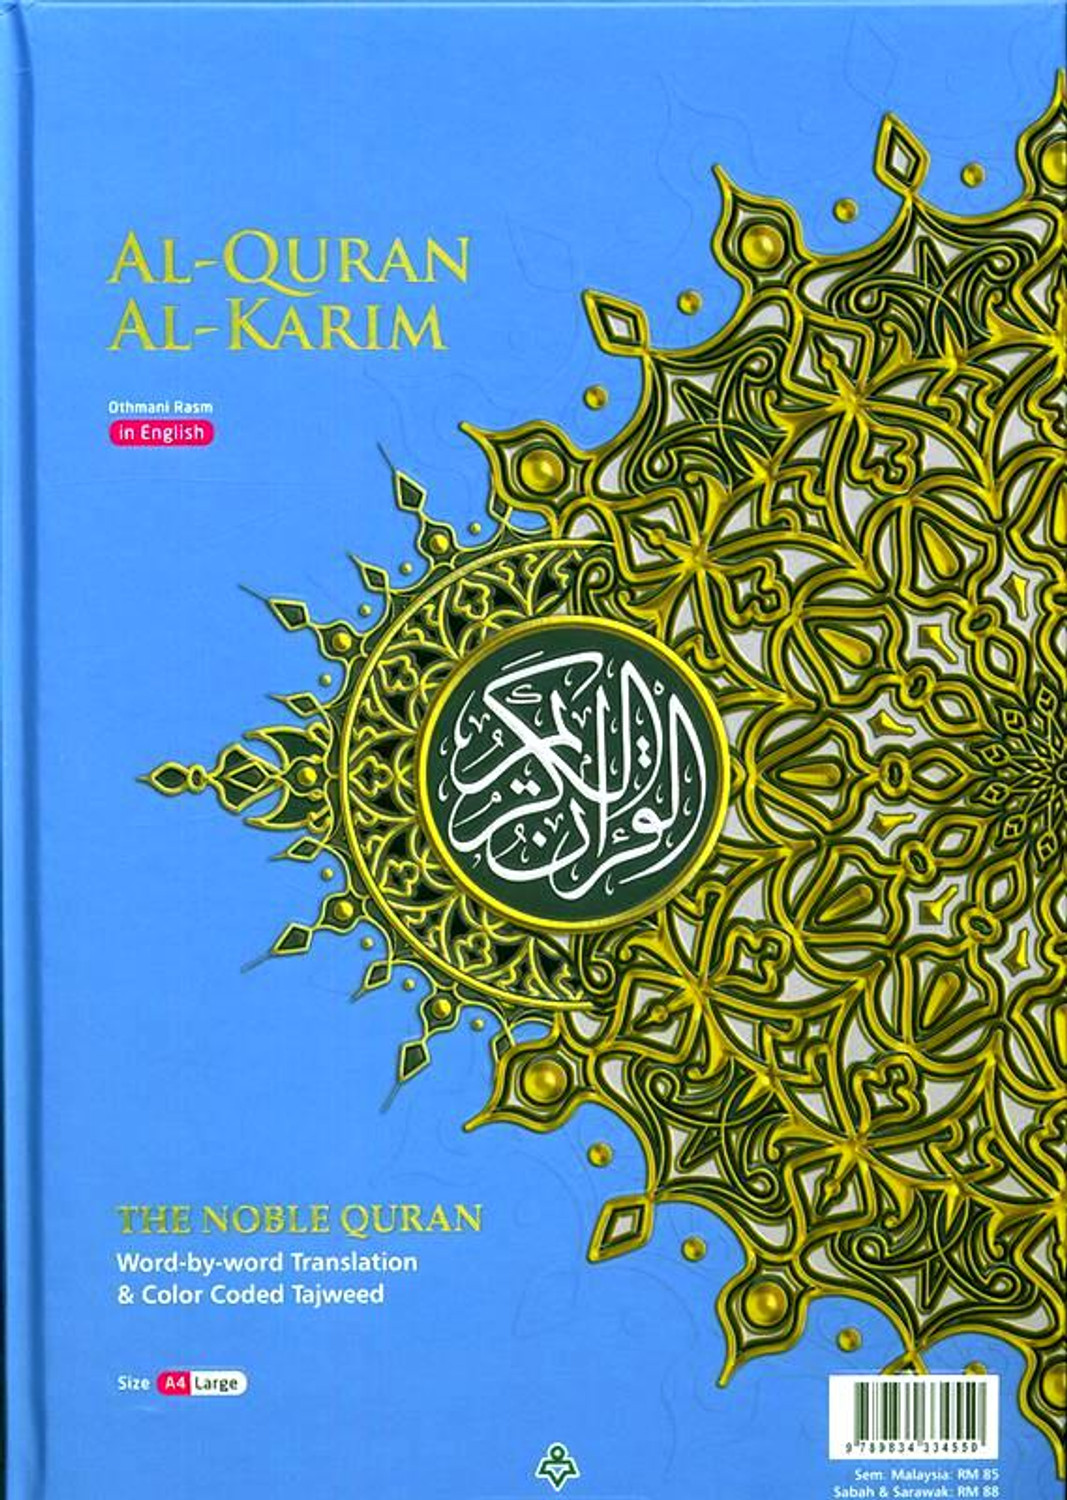 The Noble Quran Word-by-Word Translation & Color Coded Tajweed Usmani Font (Maqdis) (Blue)